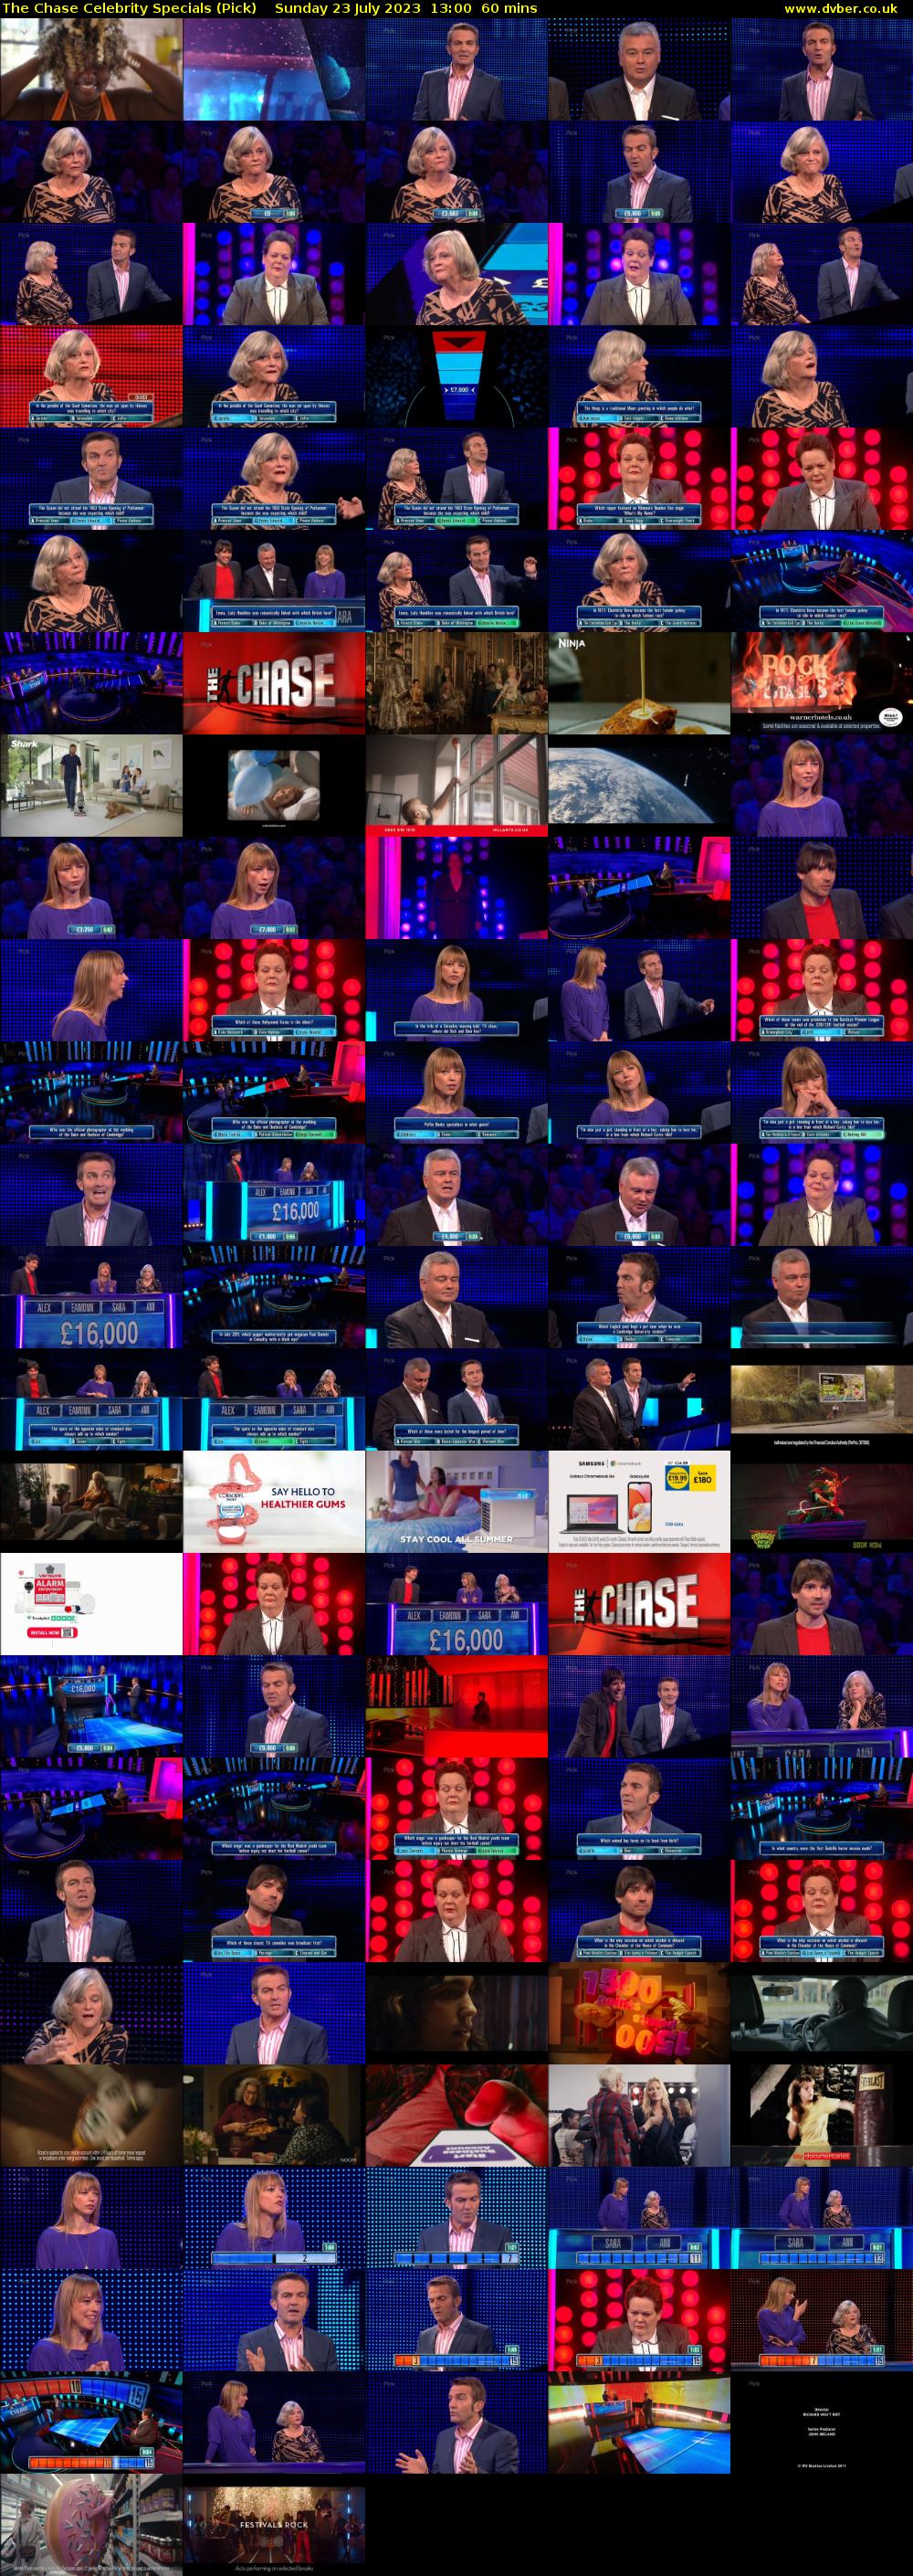 The Chase Celebrity Specials (Pick) Sunday 23 July 2023 13:00 - 14:00